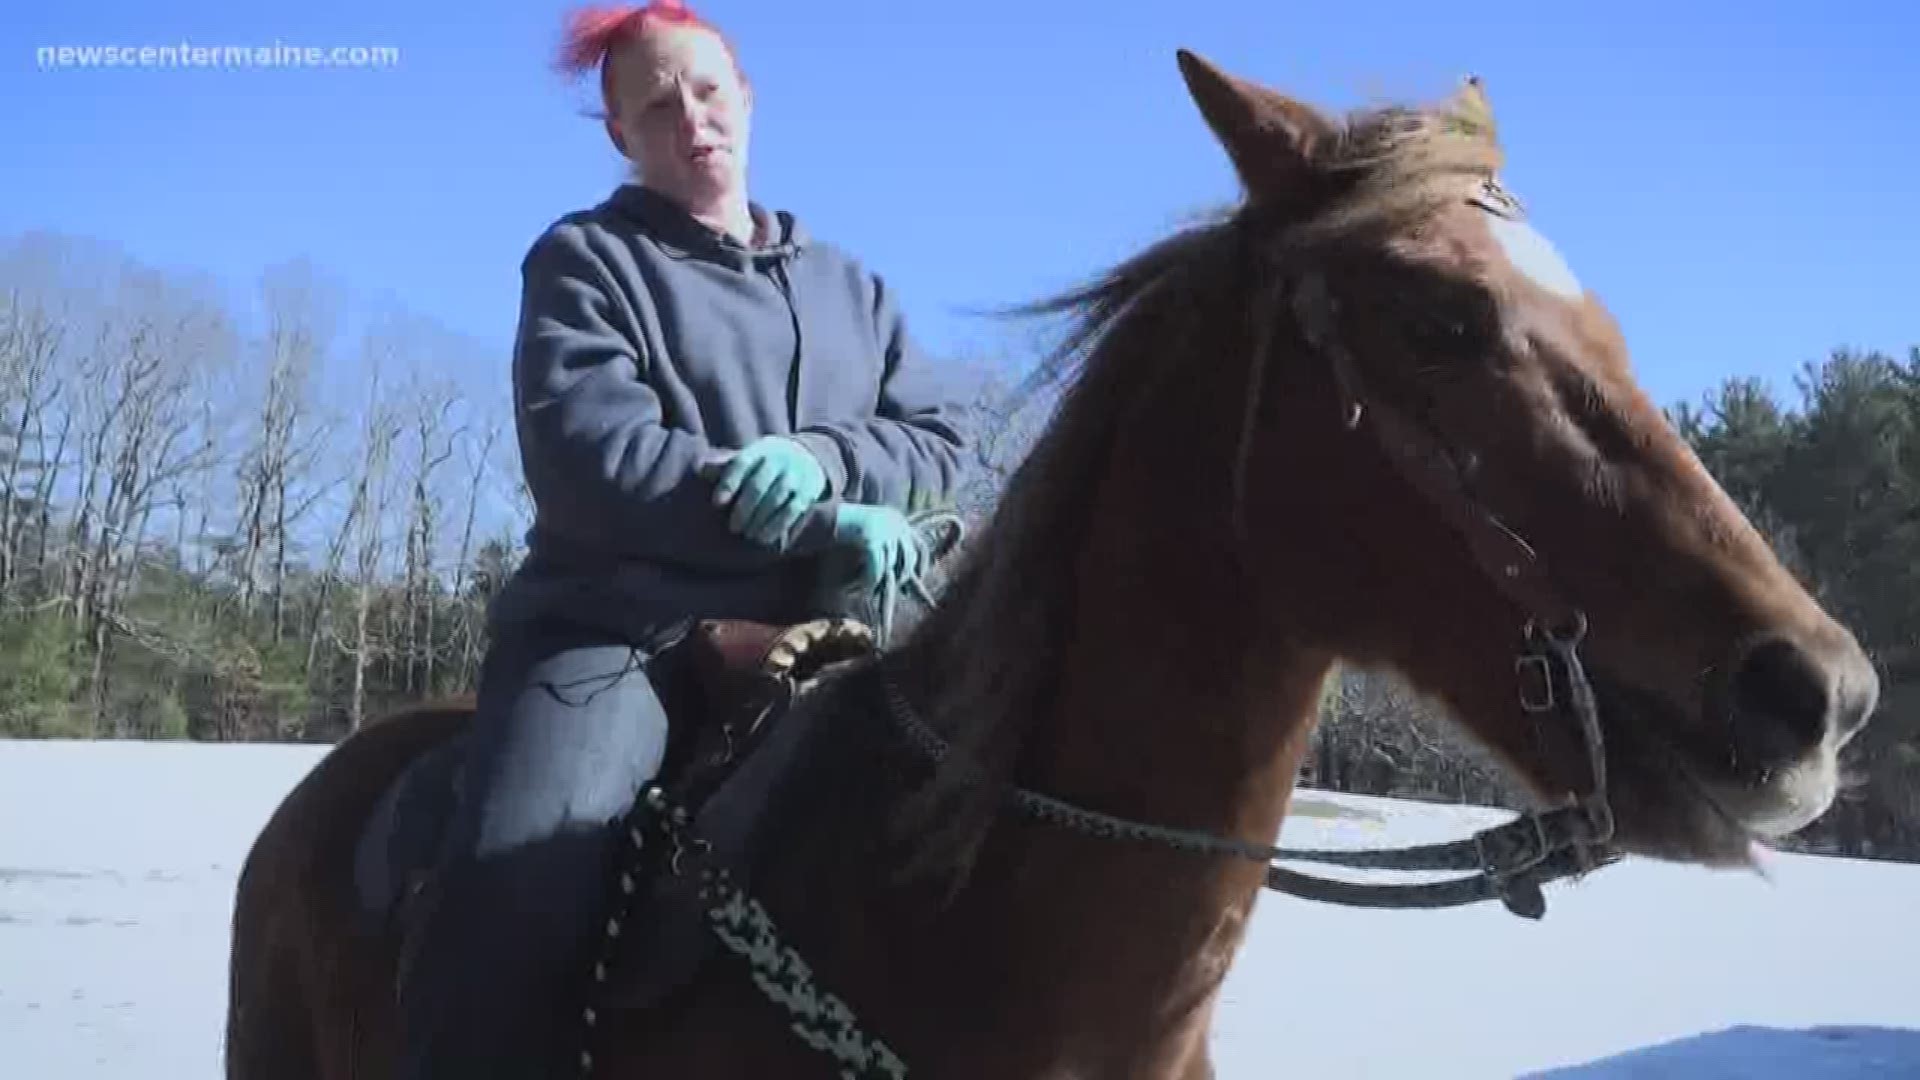 Trending Topics: Sometimes you just have to take your horse through a drive-thru